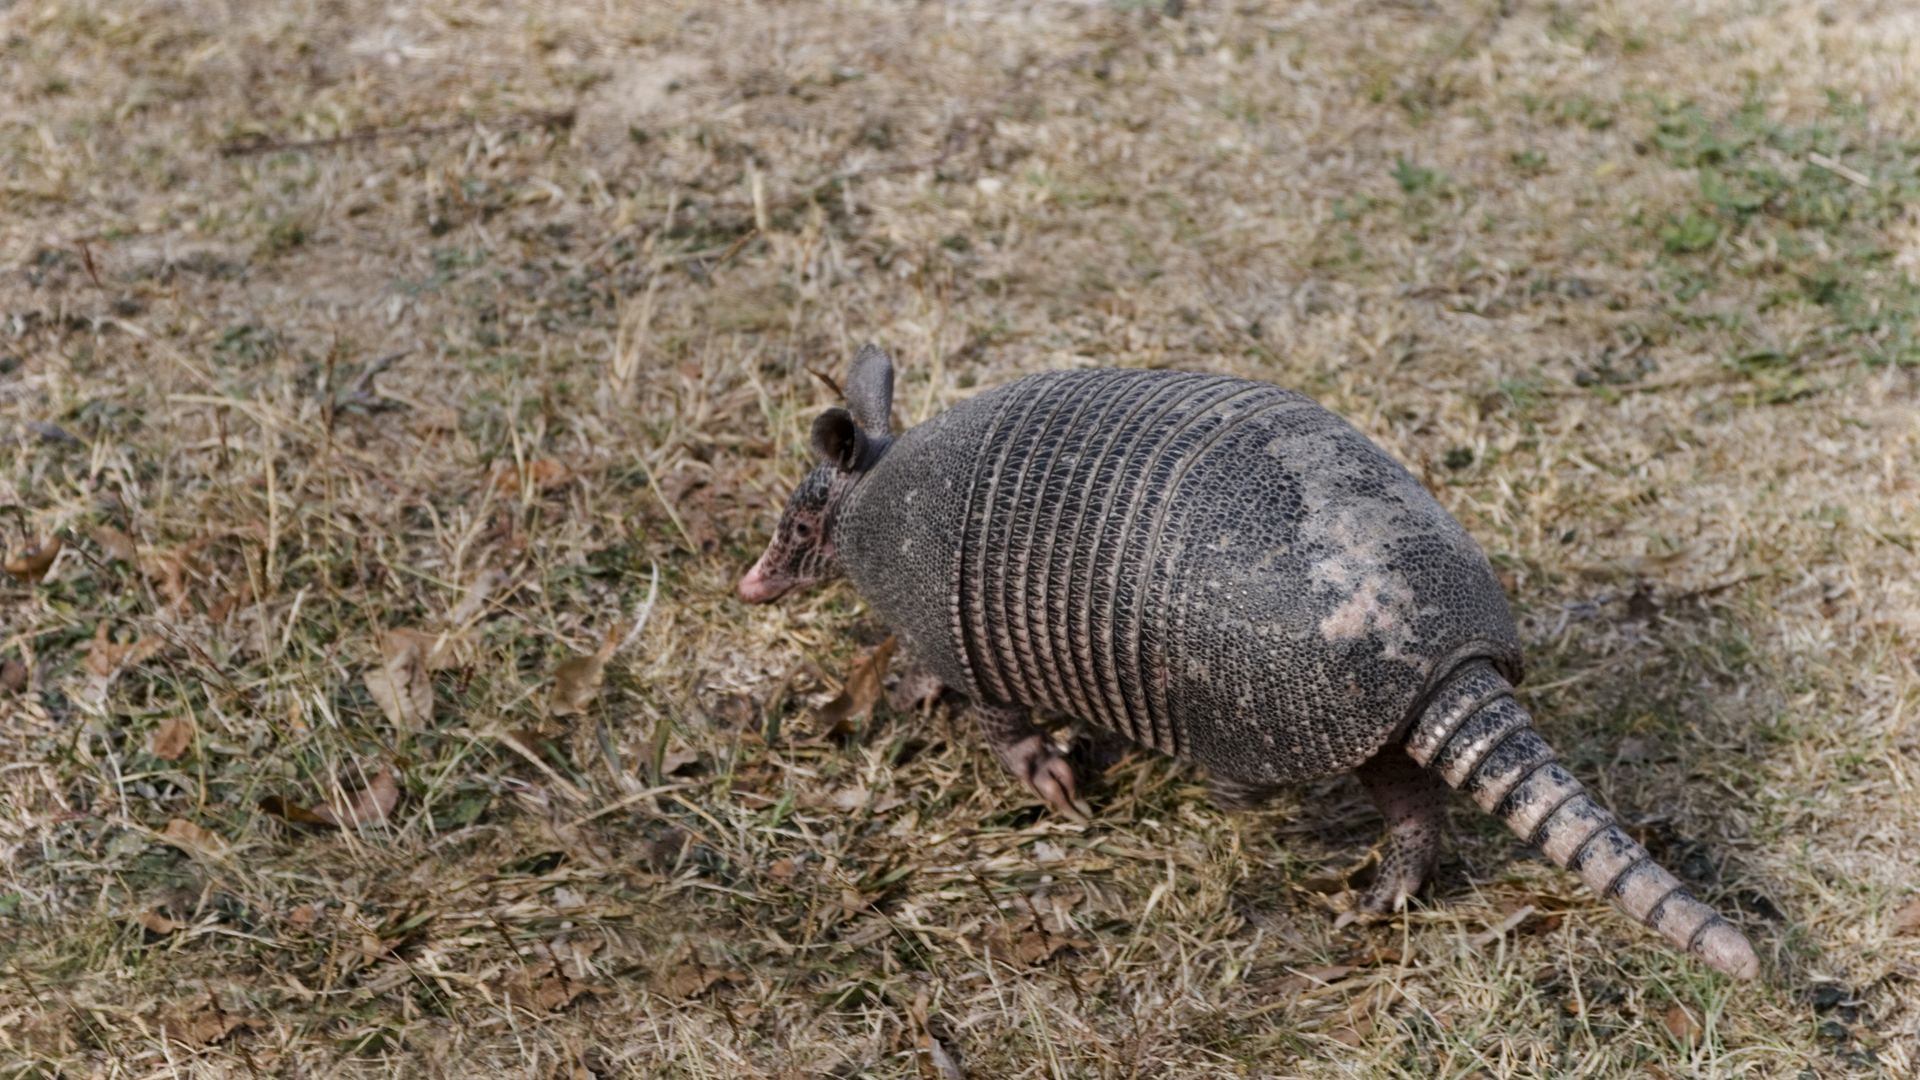 Armadillo Animal In The Grass In Texas, Scared. (Photo By: MyLoupe/UIG Via Getty Images)